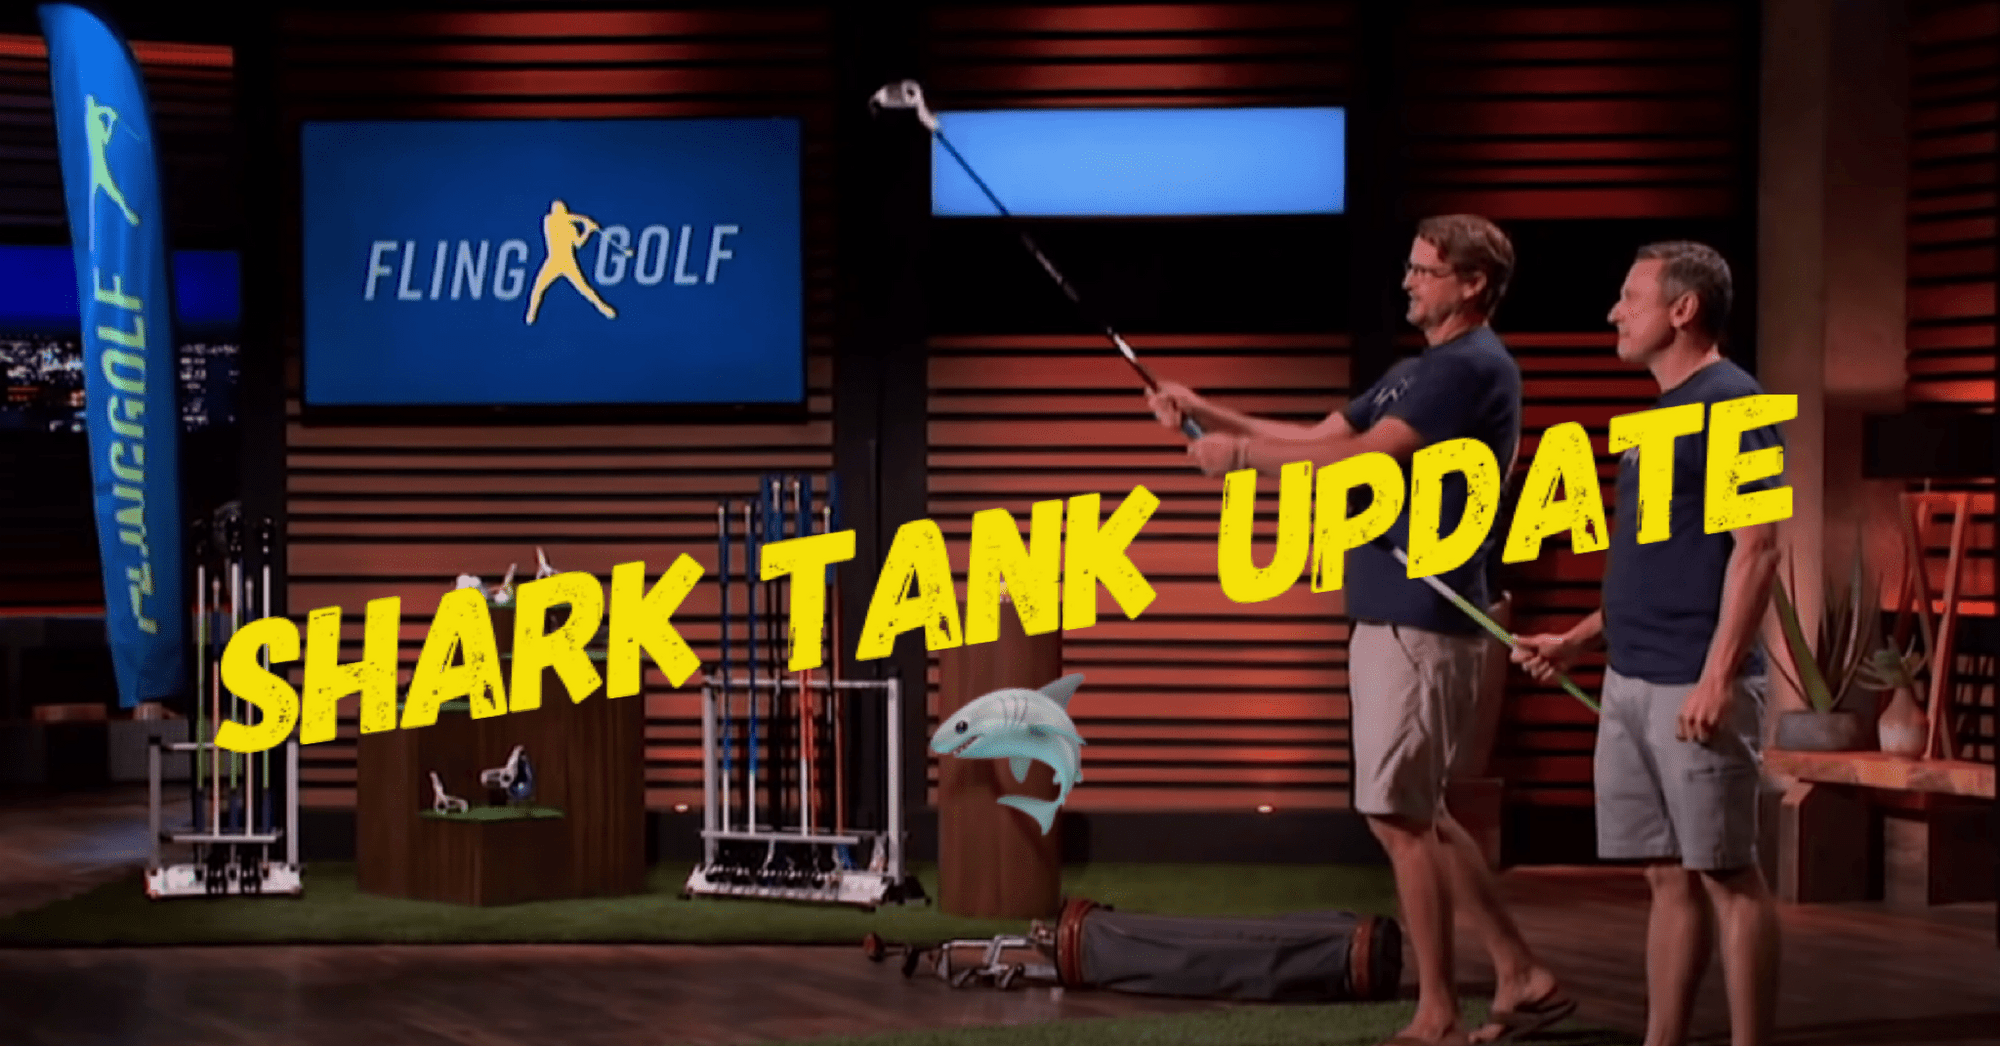 Shark Tank Update: What's Happened with FlingGolf in 2 Years?